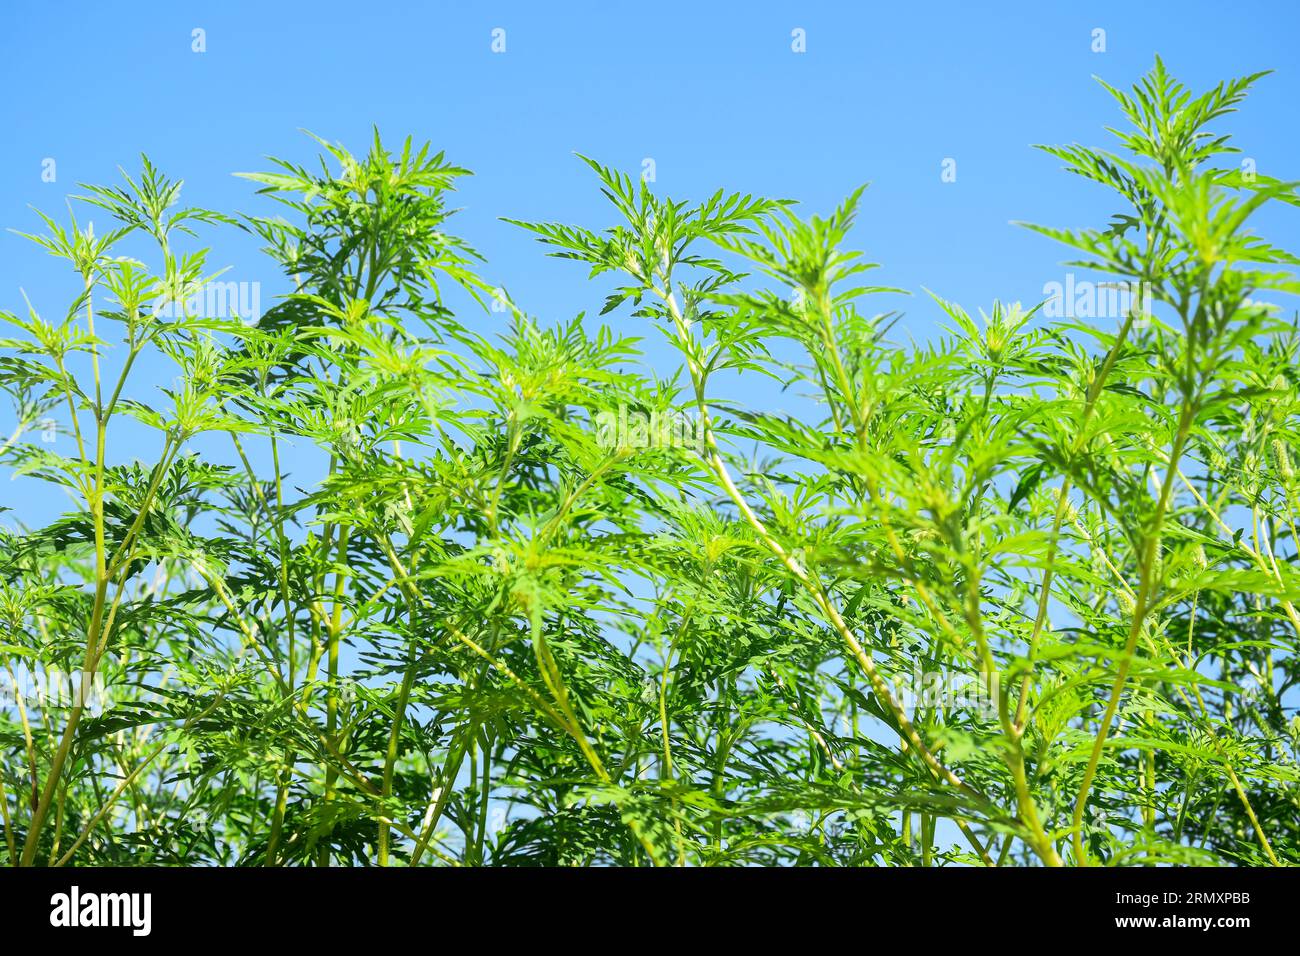 American common ragweed against blue clear sky. Dangerous plant. Ambrosia shrubs that causes allergic reactions, allergic rhinitis. Copy space. Select Stock Photo